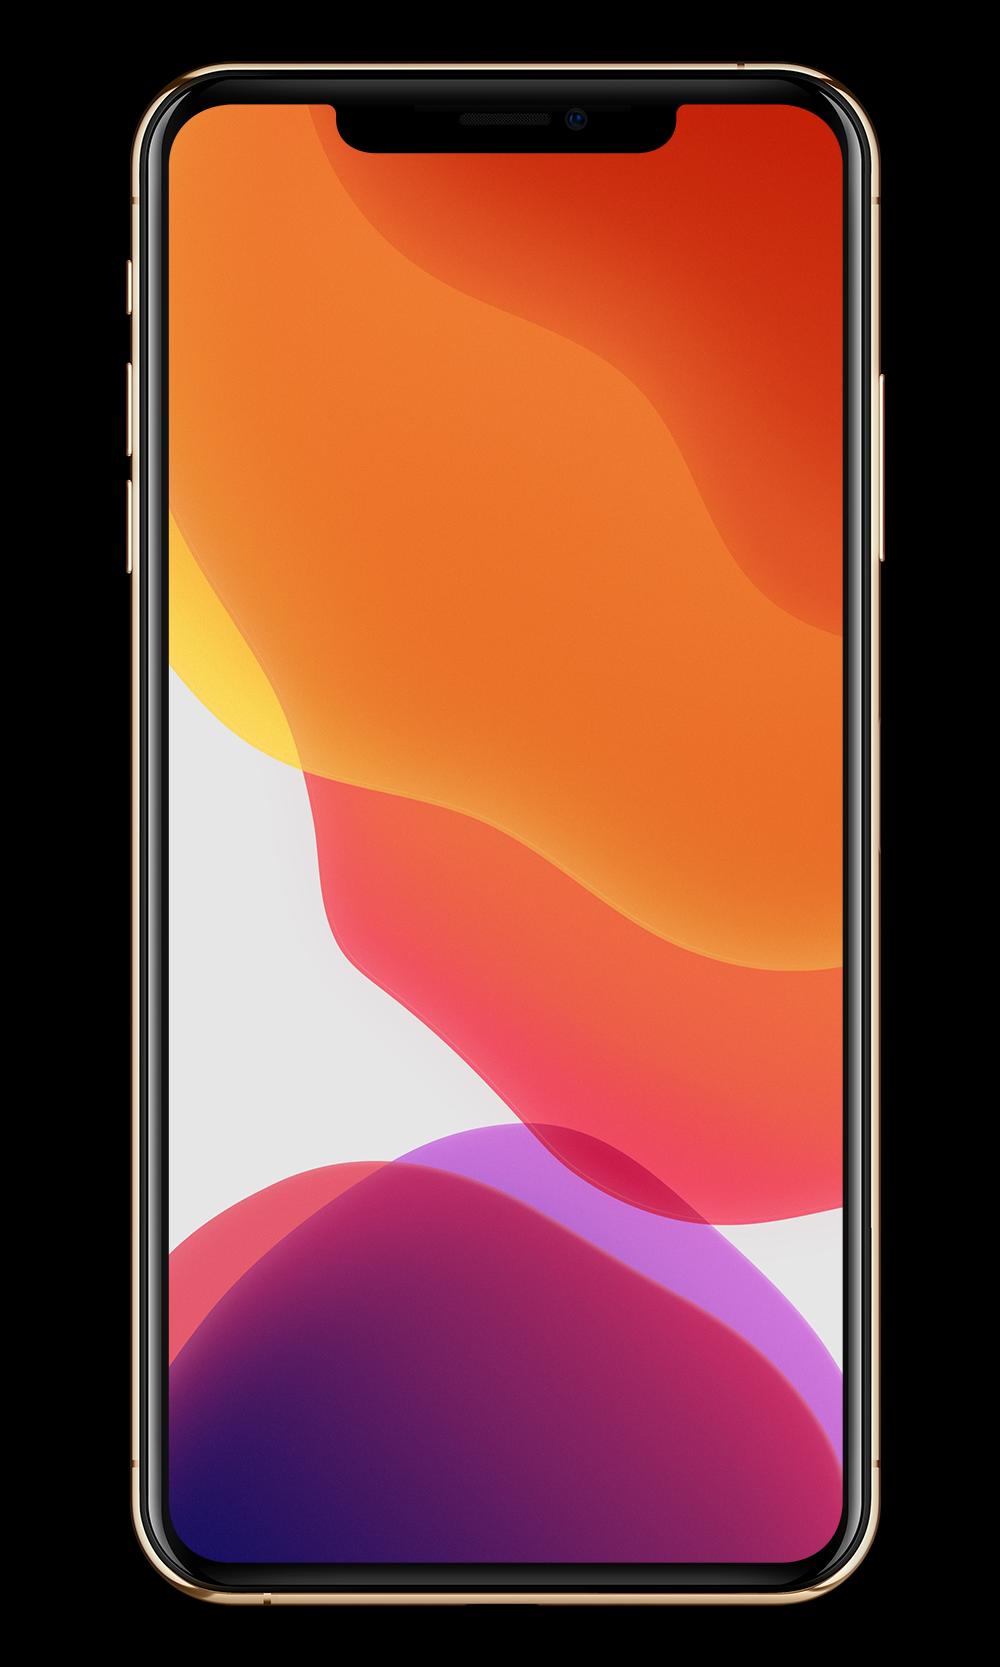  Wallpapers  for iPhone  Xs  Xr  Xmax Wallpaper  I OS 13 for 